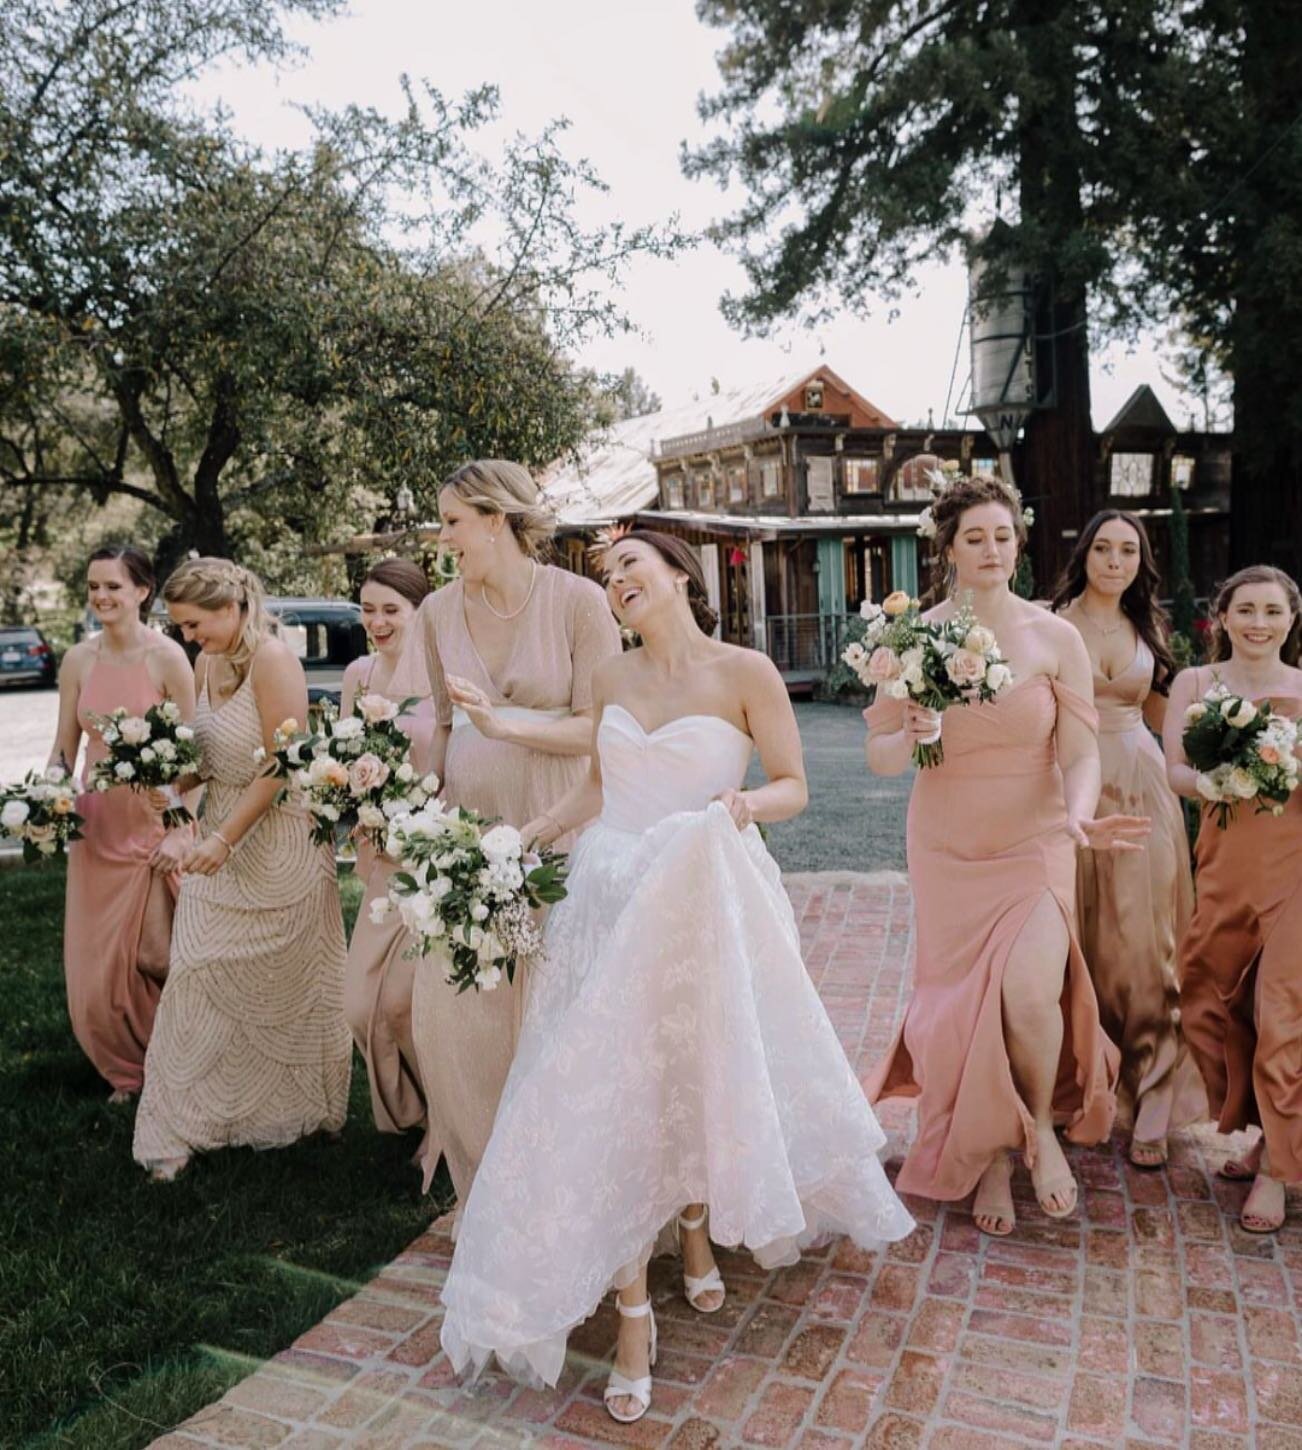 Imbibing this tribe vibe as we embark on another exciting week ahead. Have a great sunday evening everyone 💜💜💜 

Thank you for the tag @handjflowers 

📸 by @heartfelt.media 

#weddingdestination #triplesranchnapa #wedding #calistoga #napa #weddin